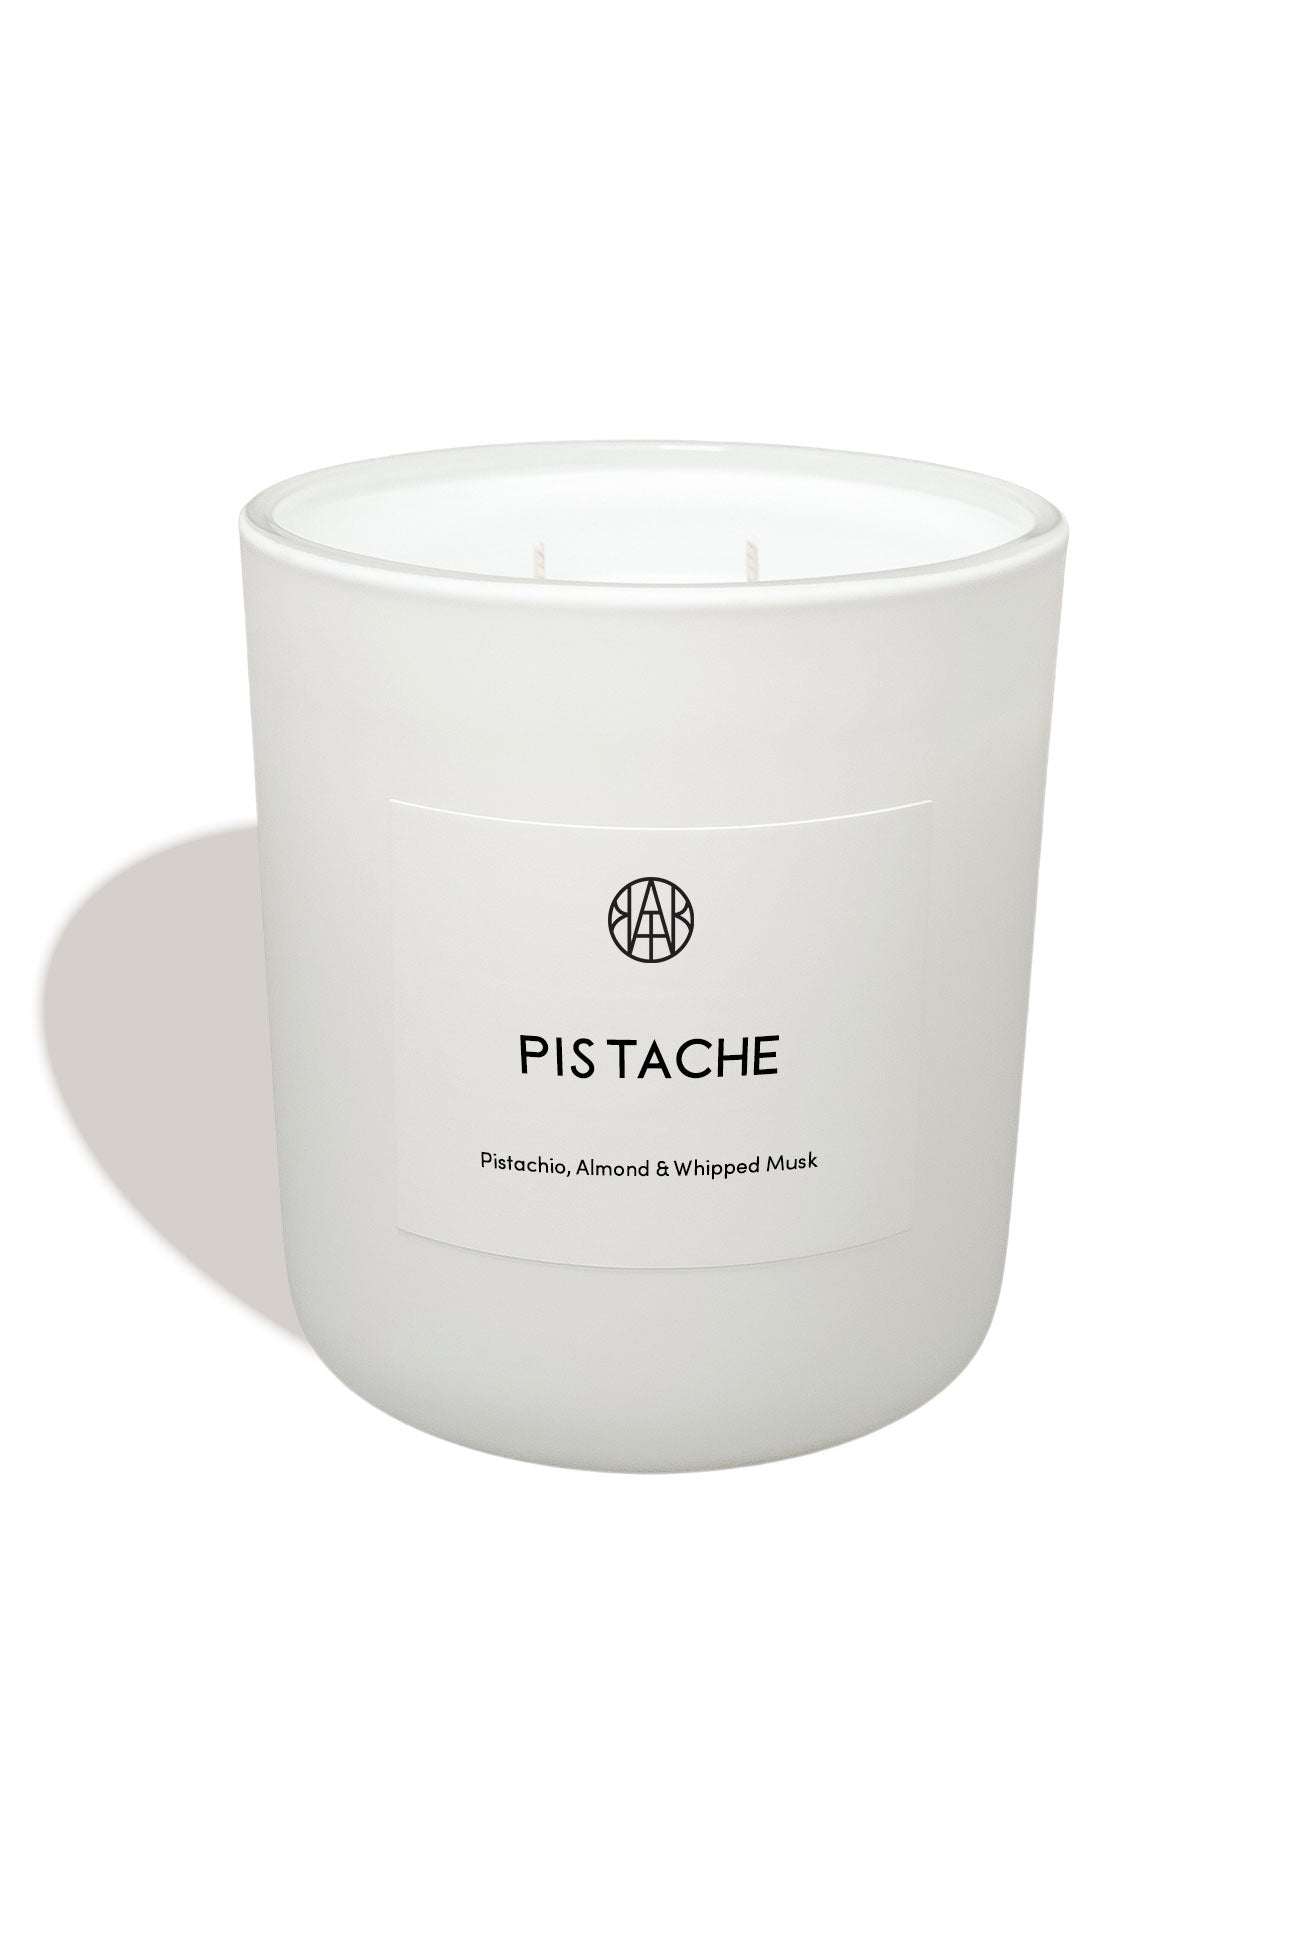 PISTACHE - Deluxe Candle - AEMBR - Clean Luxury Candles, Wax Melts & Laundry Care